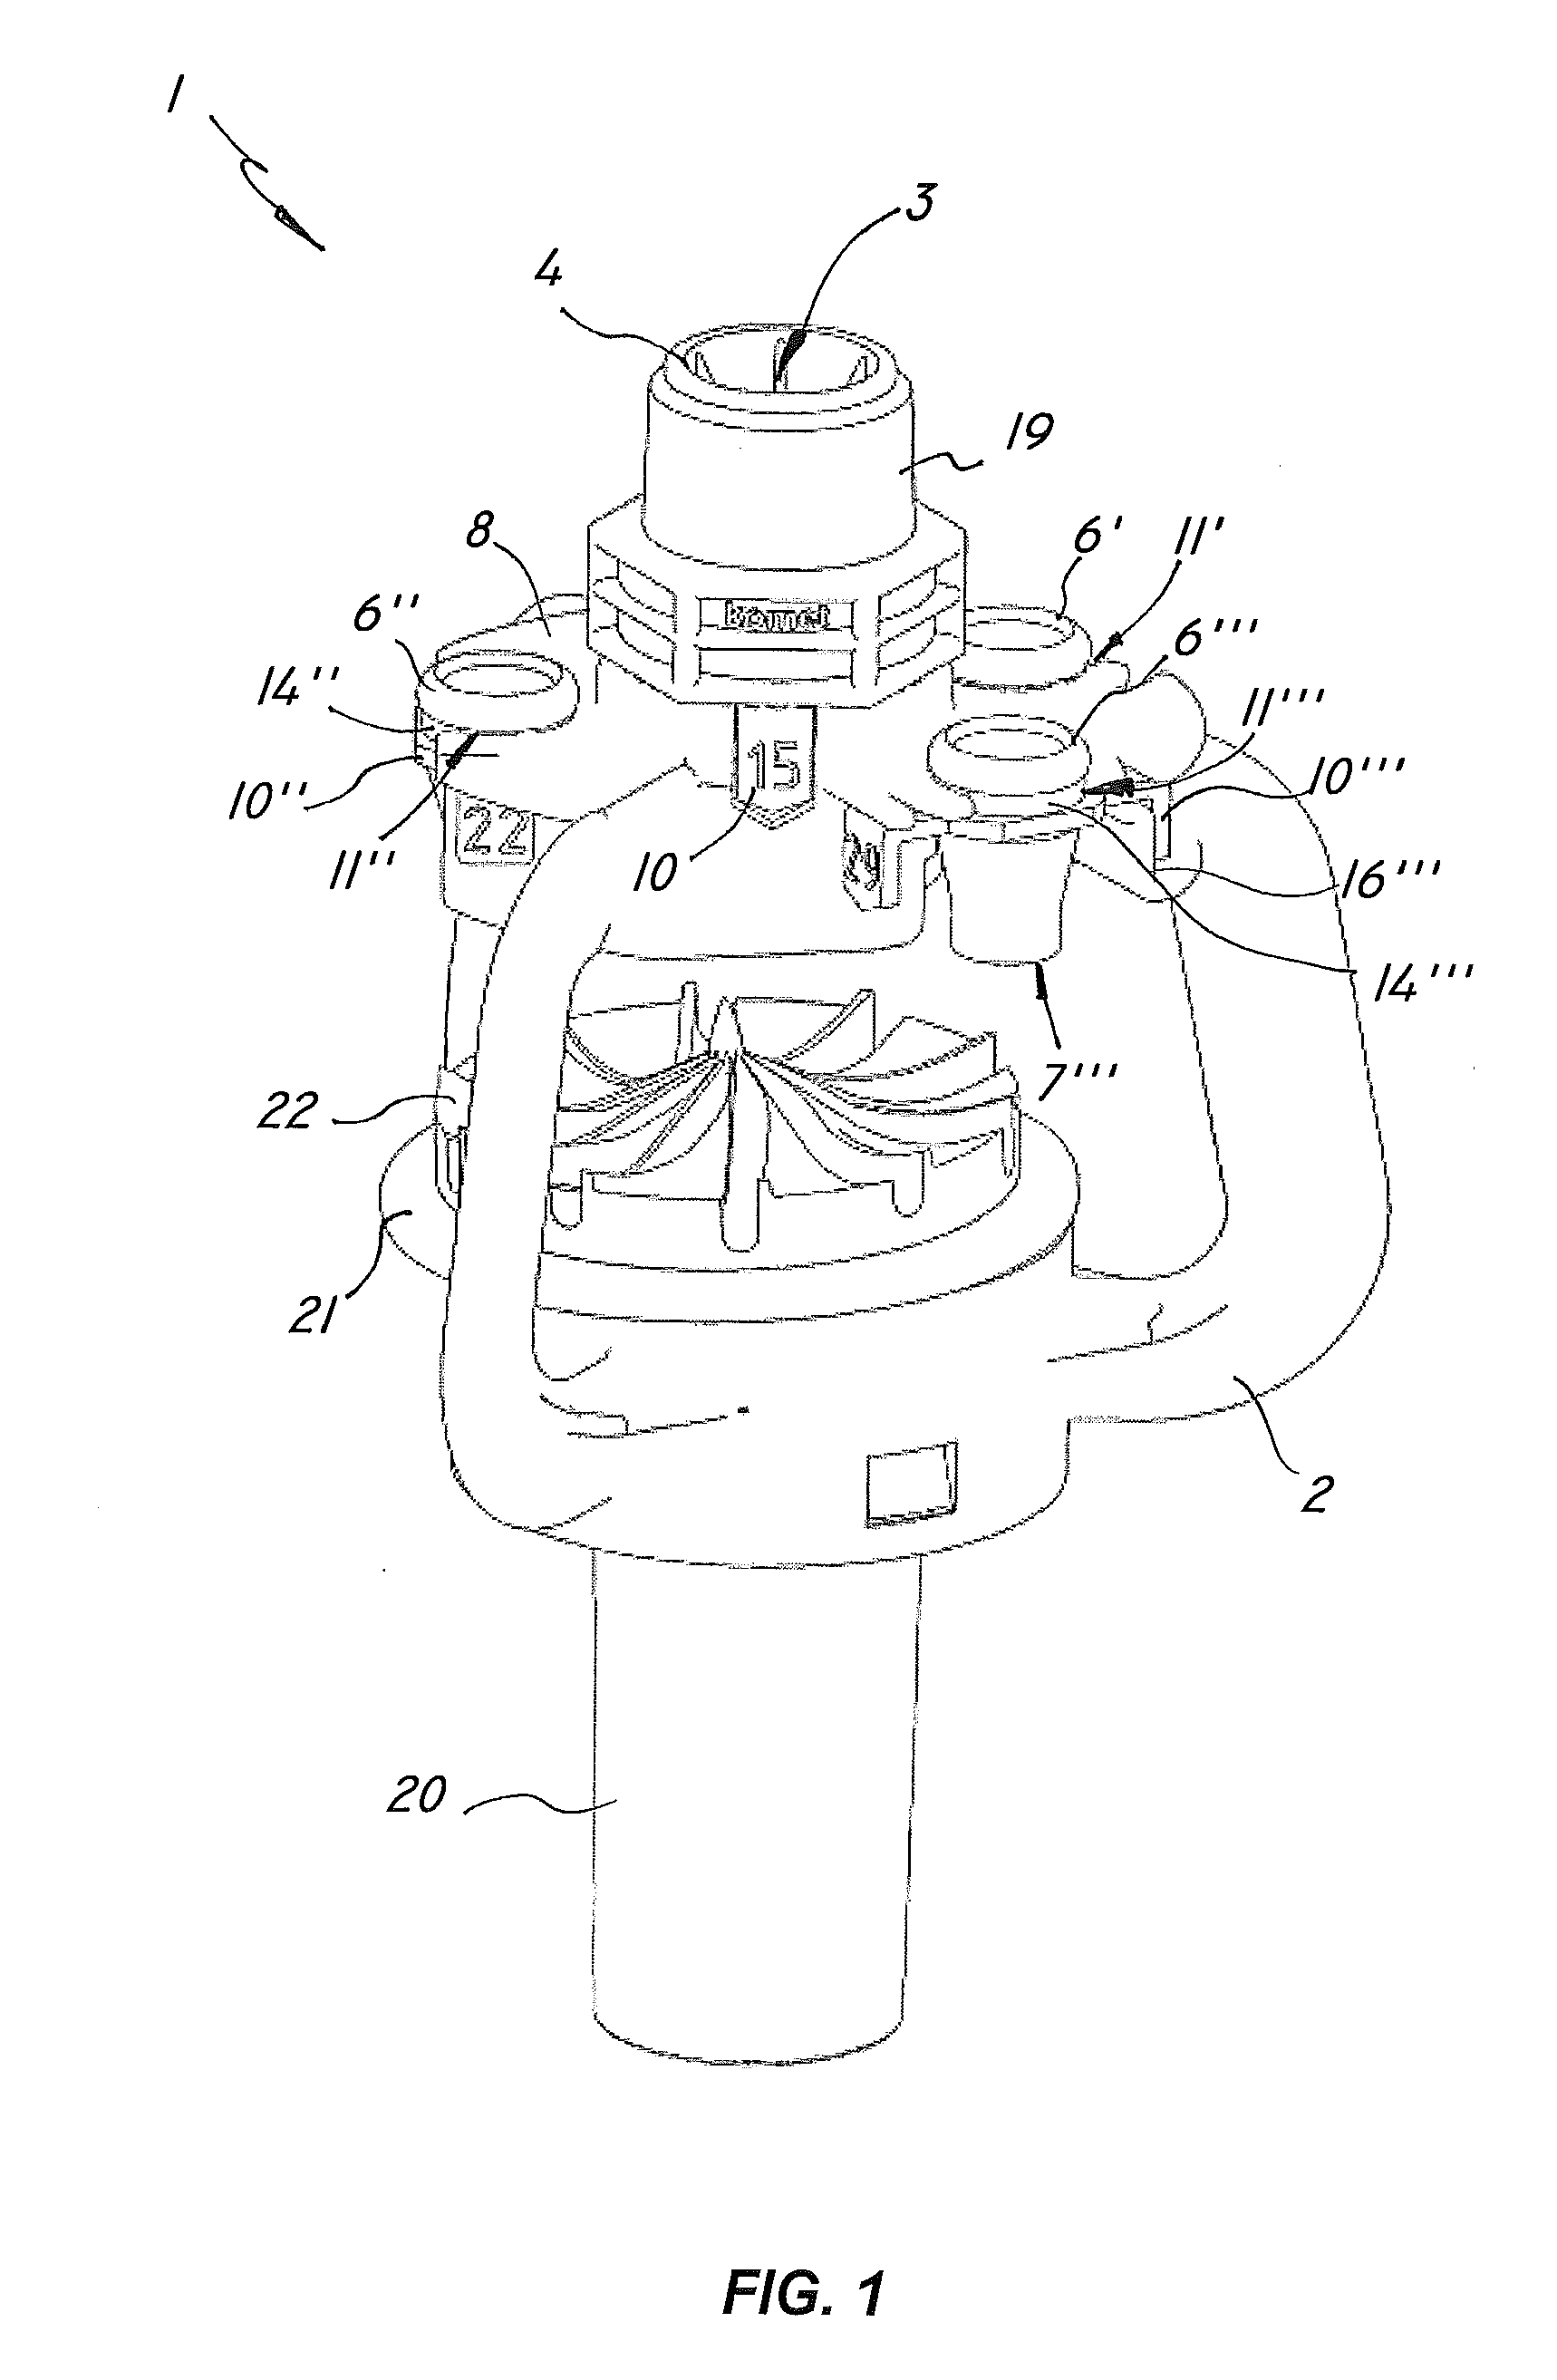 Liquid diffusing device with interchangeable nozzels